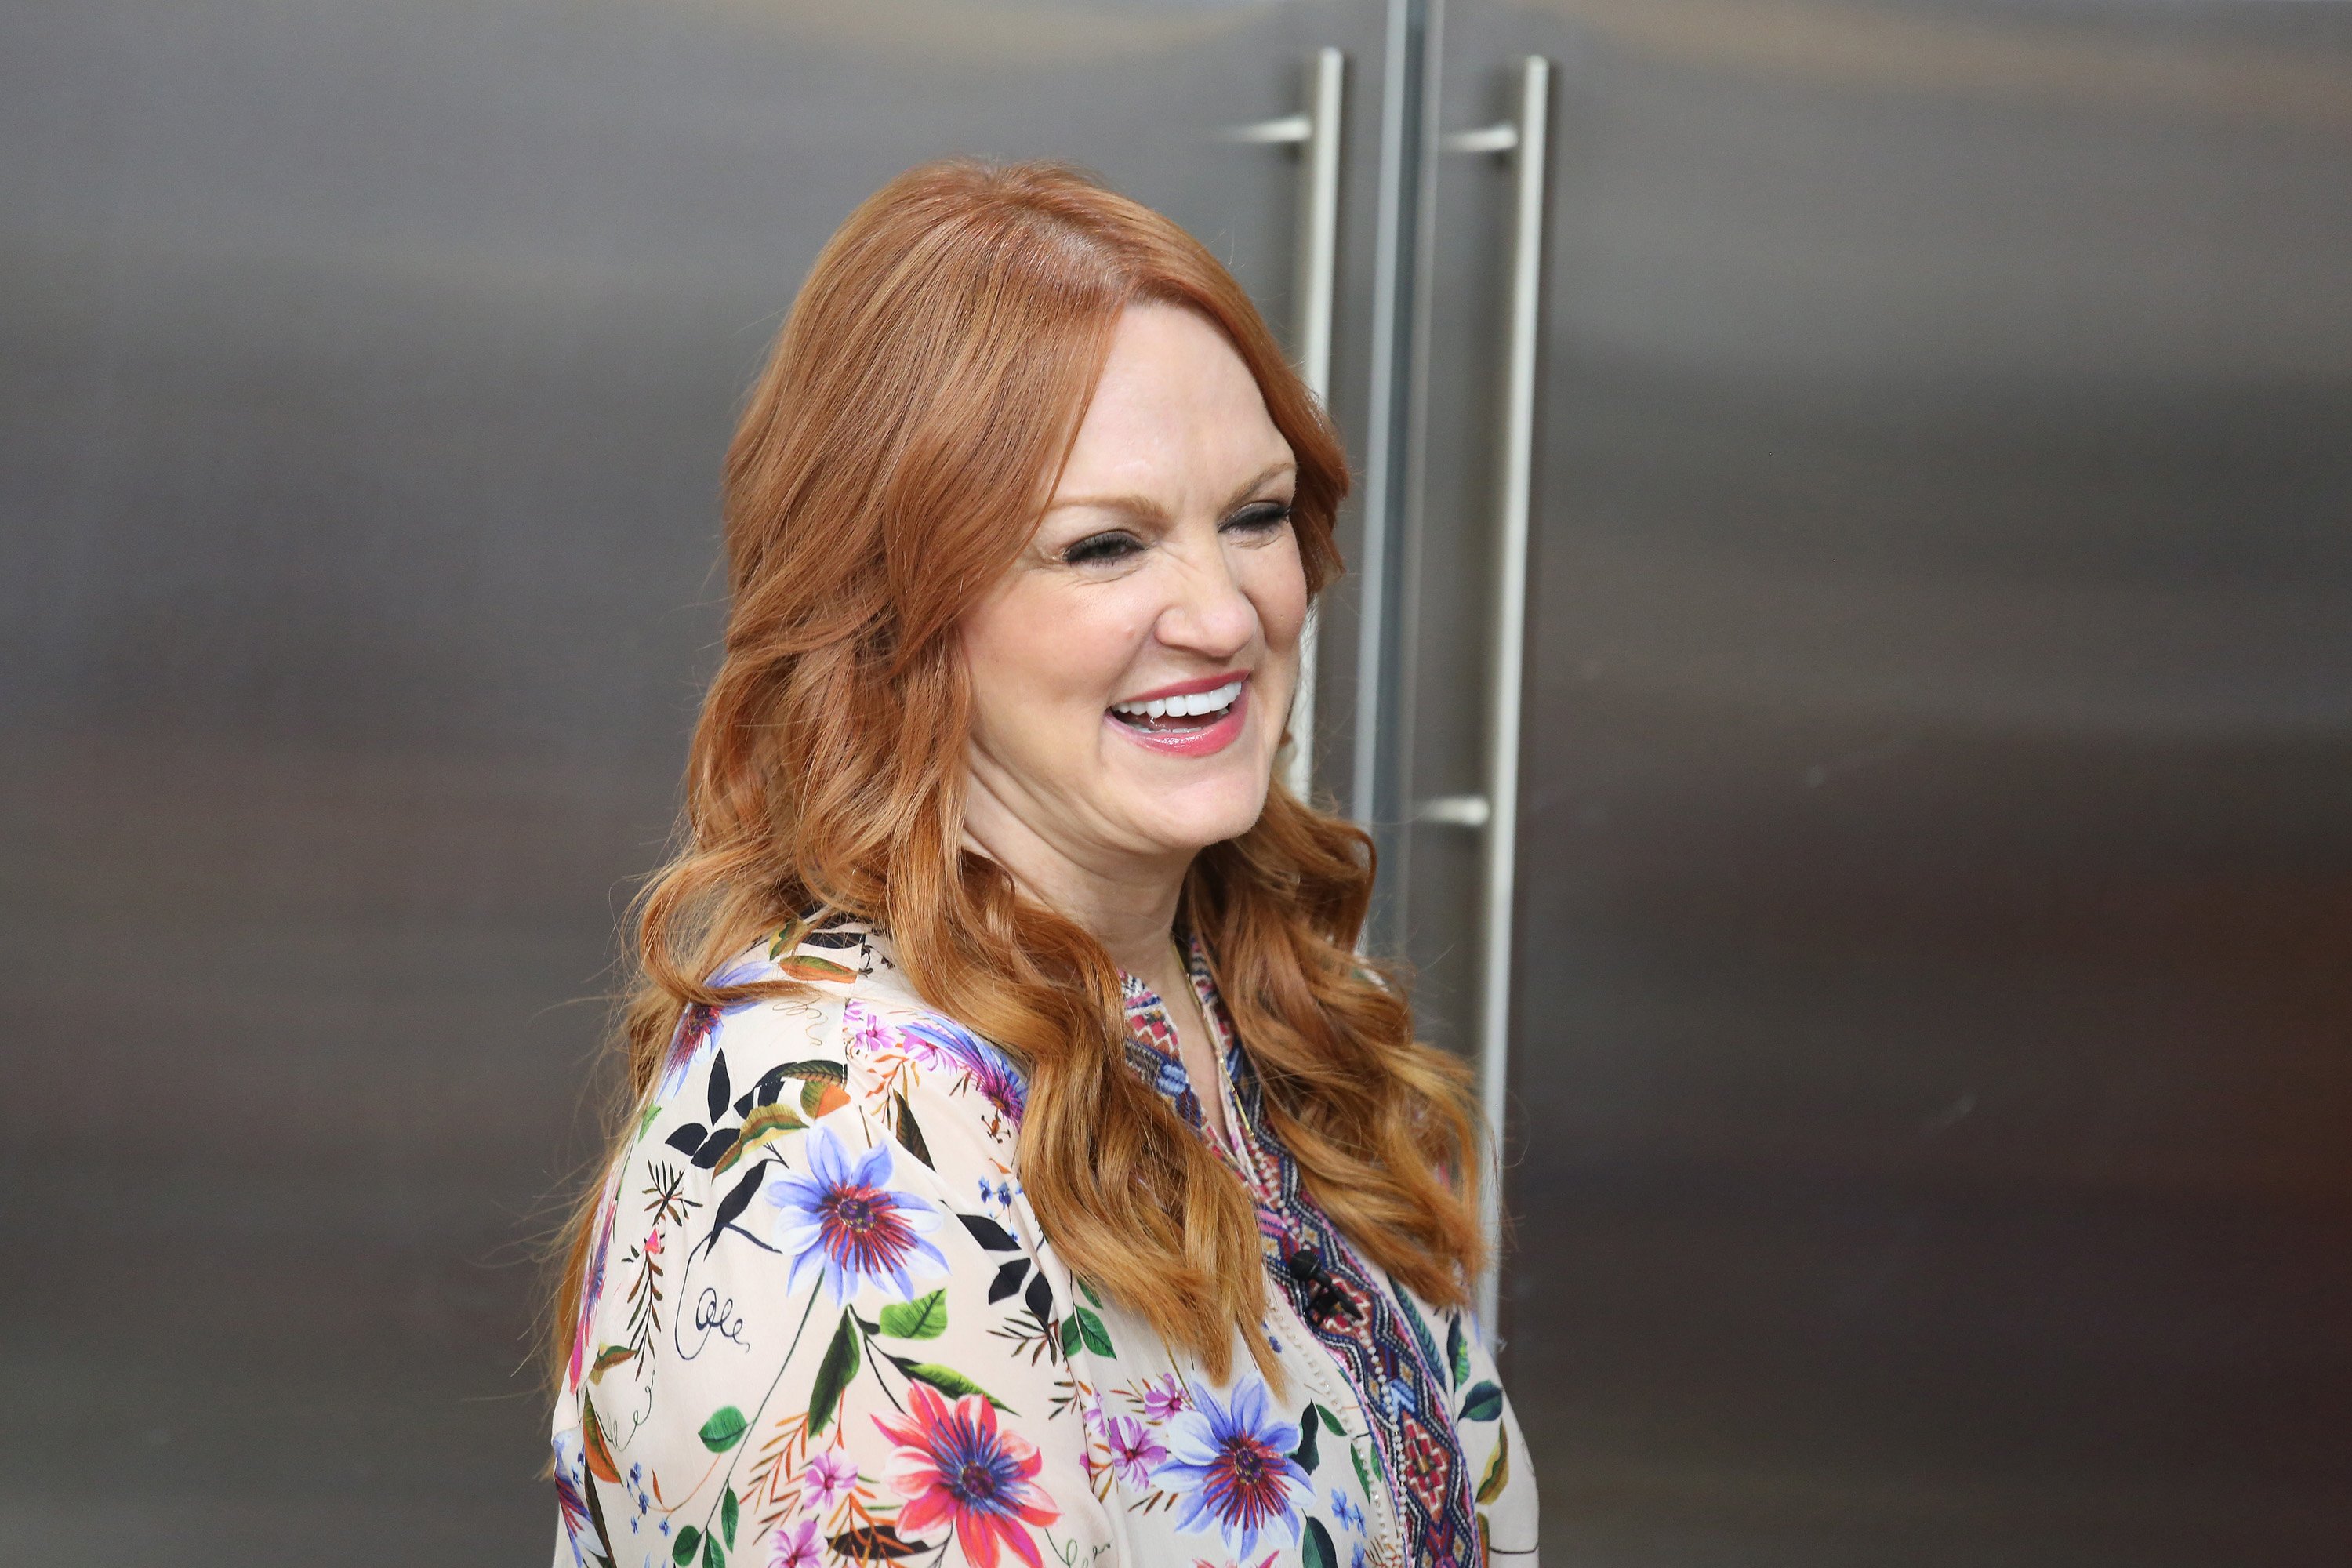 Ree Drummond on "TODAY" in 2019. | Photo: Getty Images